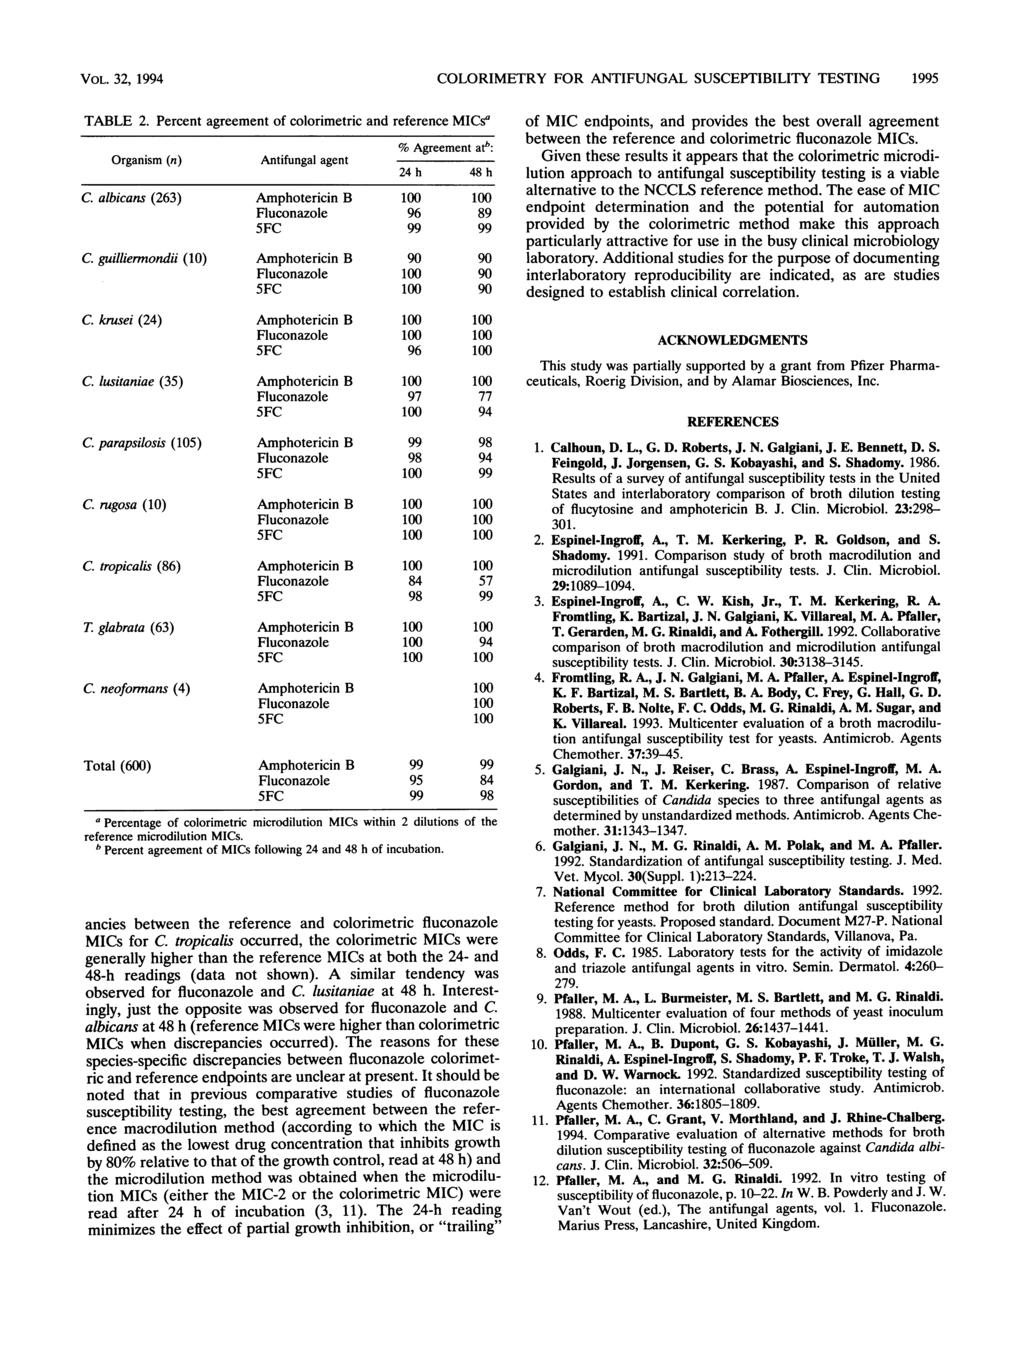 VOL., 1994 COLORIMETRY FOR ANTIFUNGAL SUSCEPTIBILITY TESTING 1995 TABLE 2. Percent agreement of colorimetric and reference MICsa % Agreement at": Organism (n) Antifungal agent h h C.